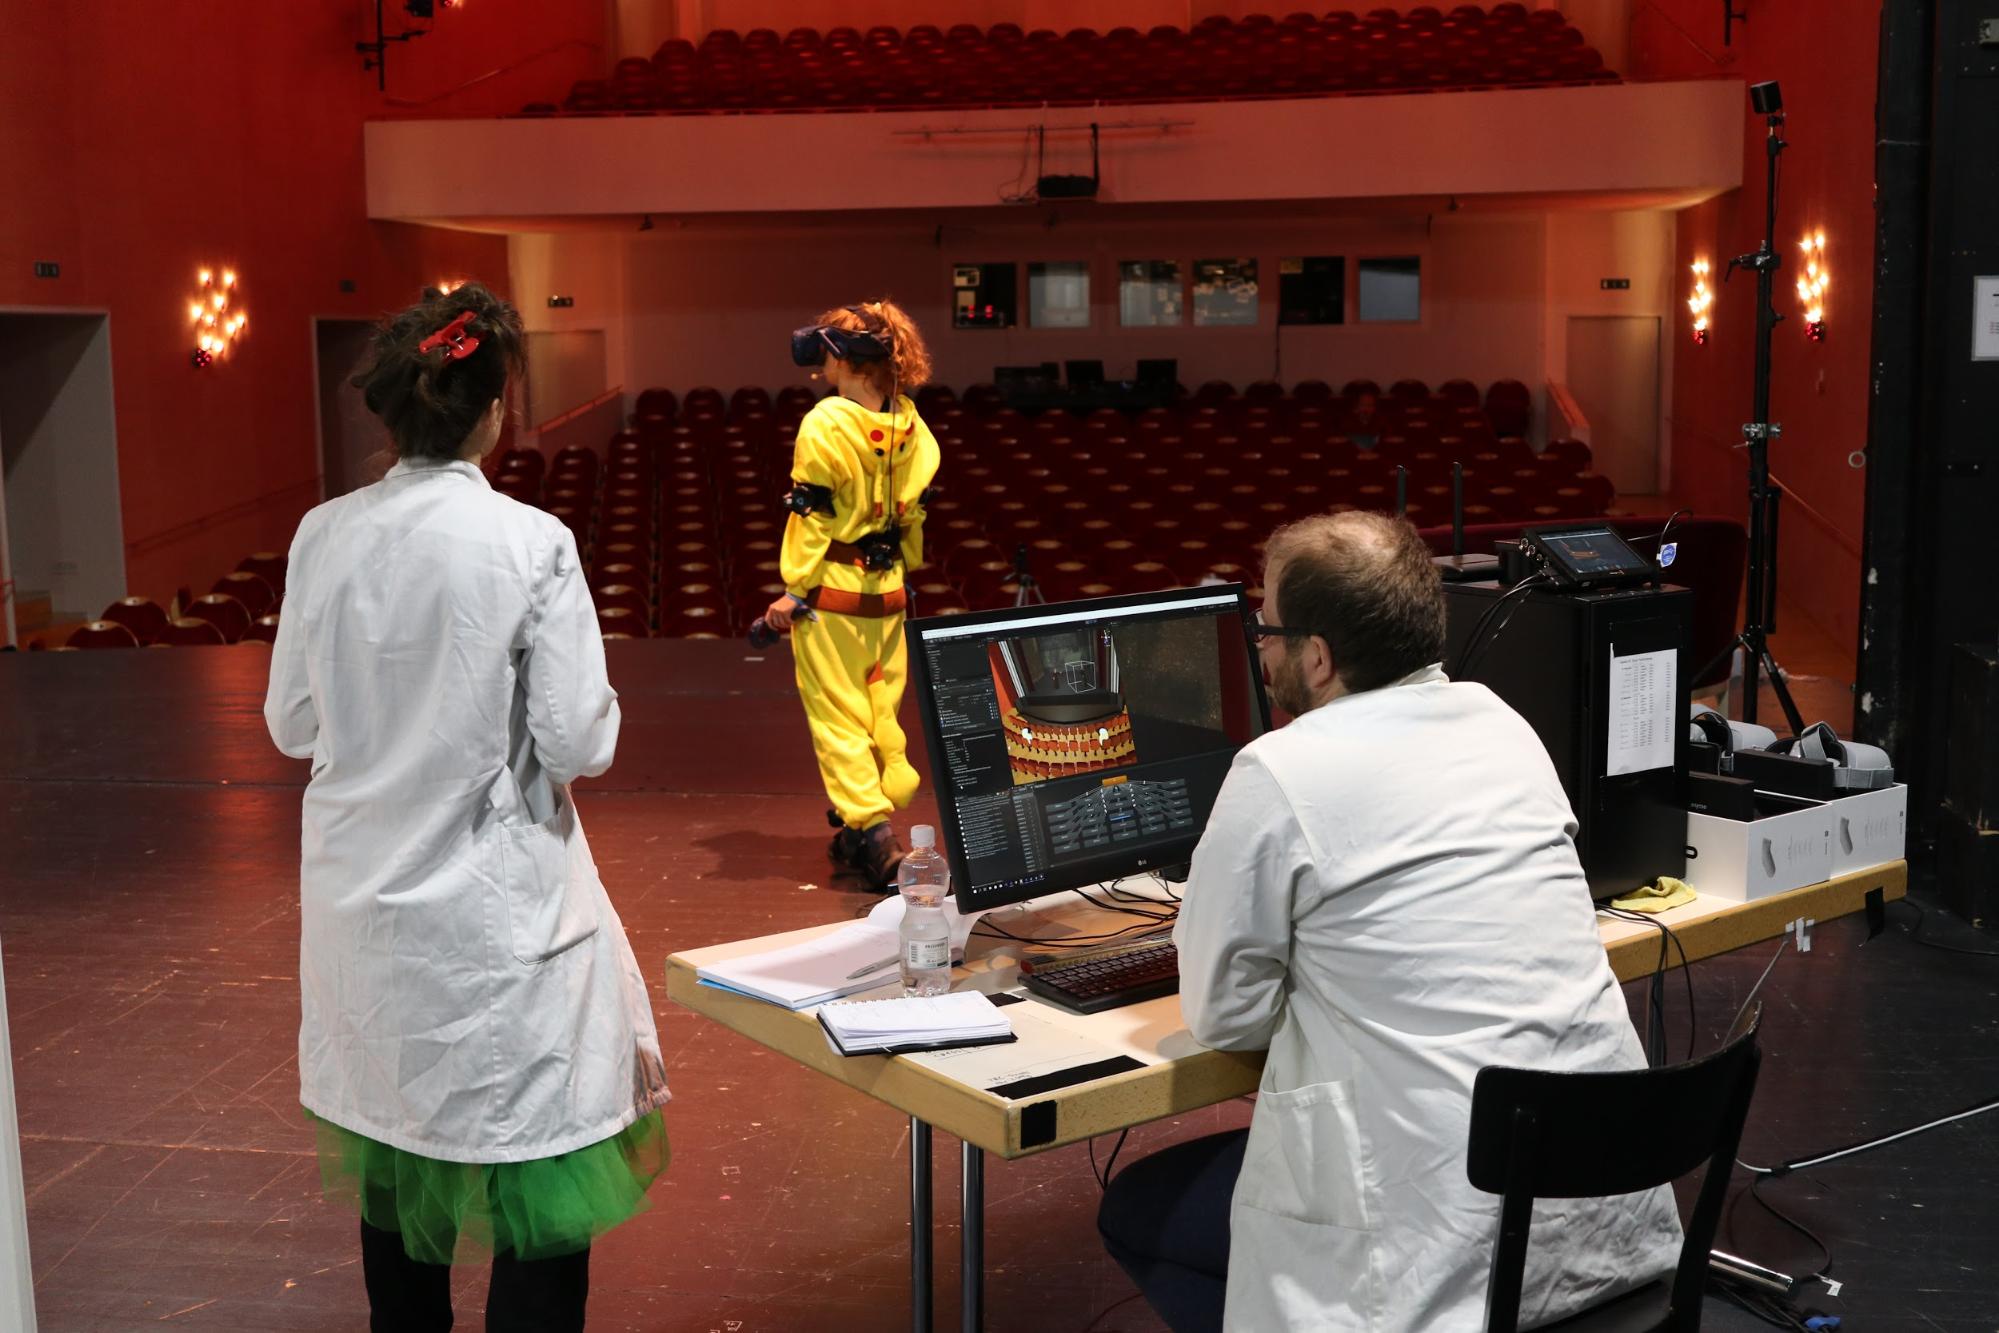 Woman in yellow using VR while others watch her and a screen